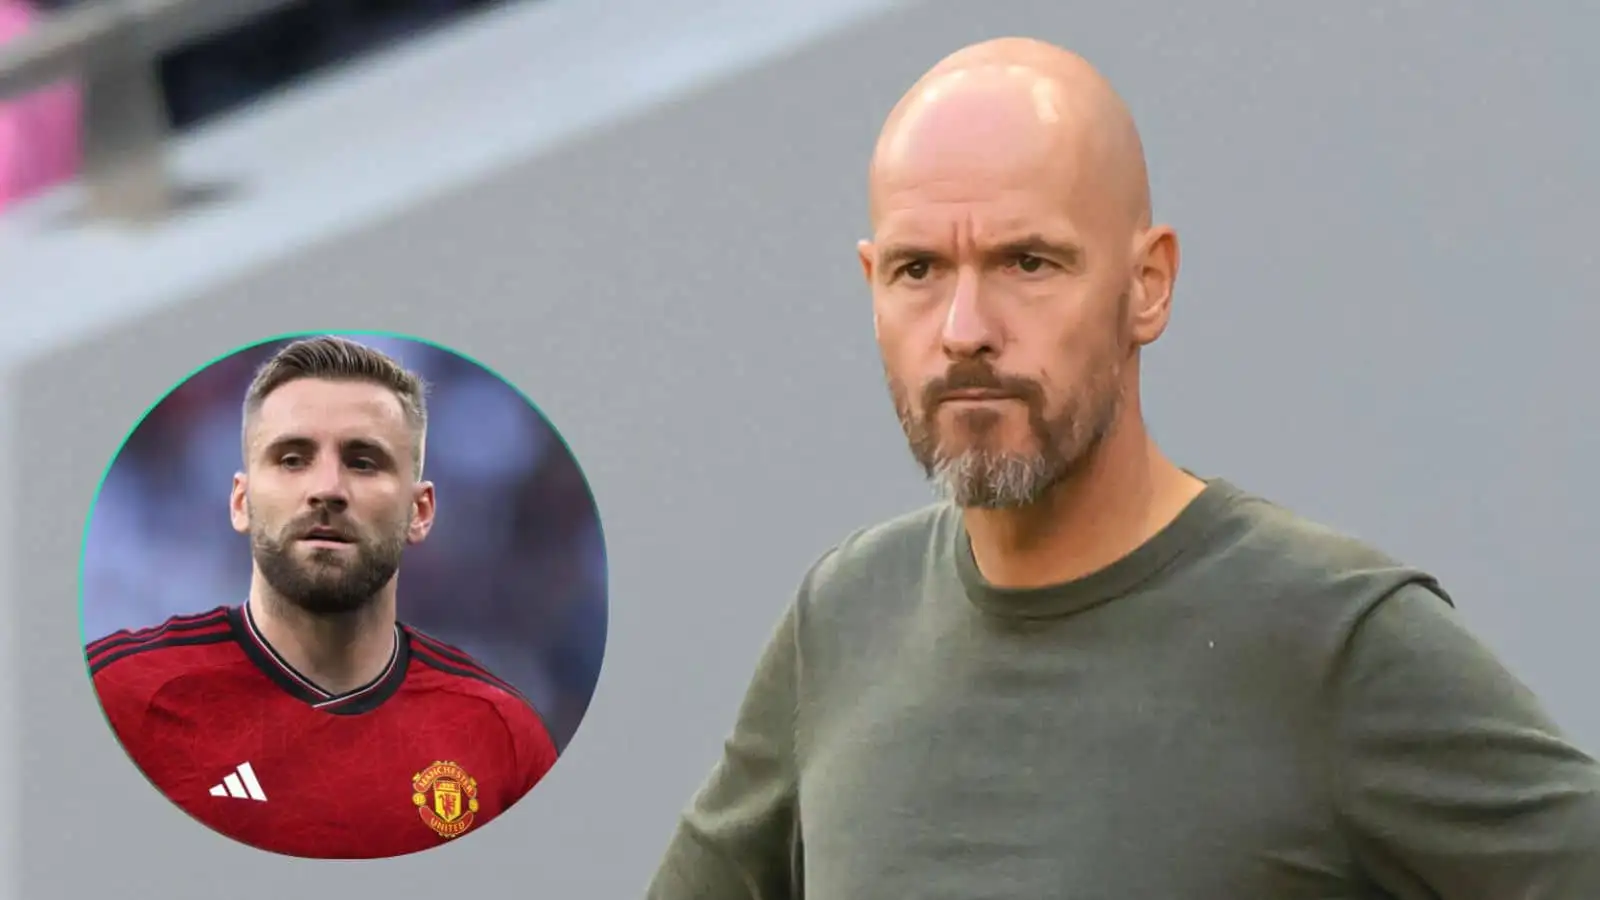 Erik ten Hag's Man Utd transfer plans have been thrown into chaos by the injury sustained to Luke Shaw